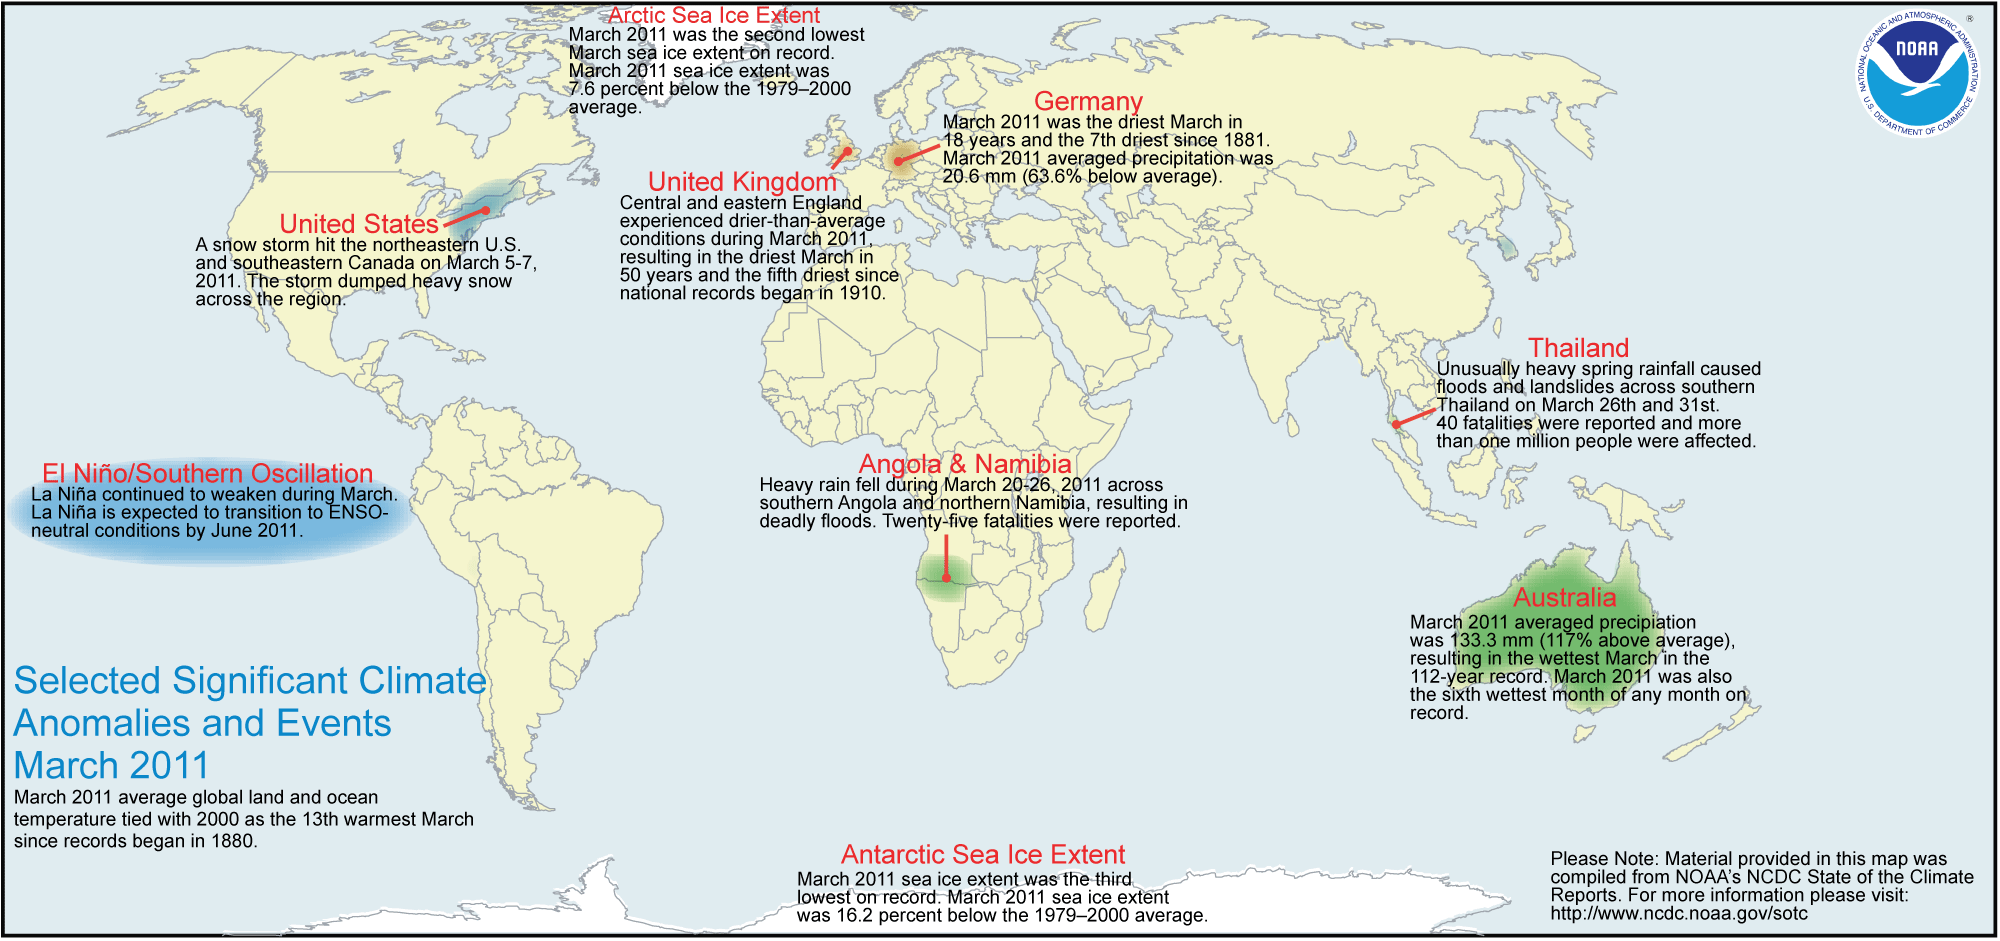 Significant Climate Anomalies March 2011